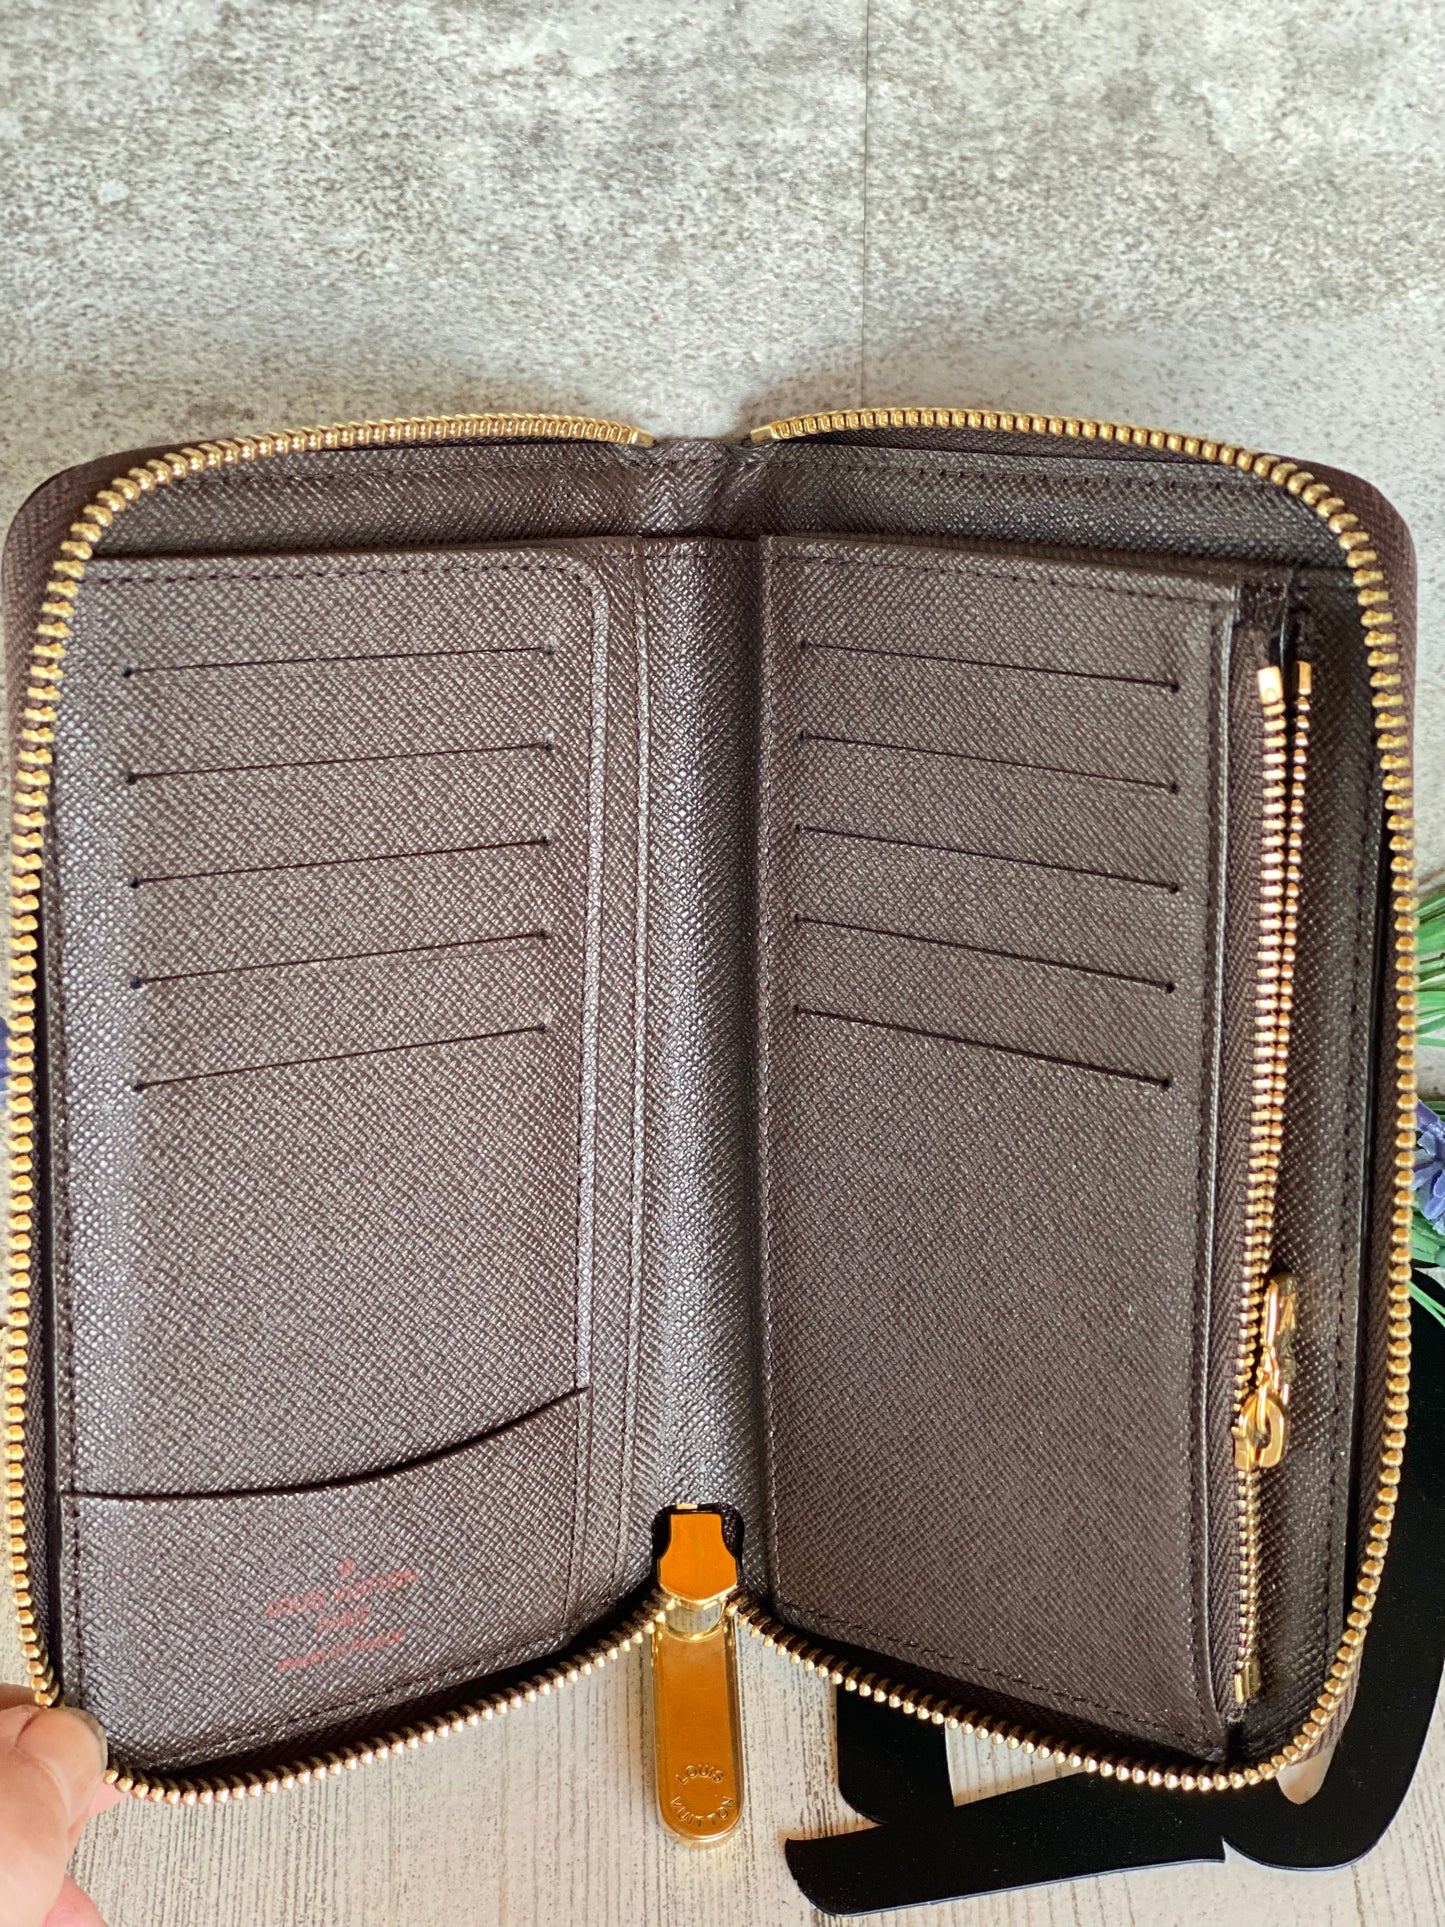 Authentic preloved consigned zippy compact wallet